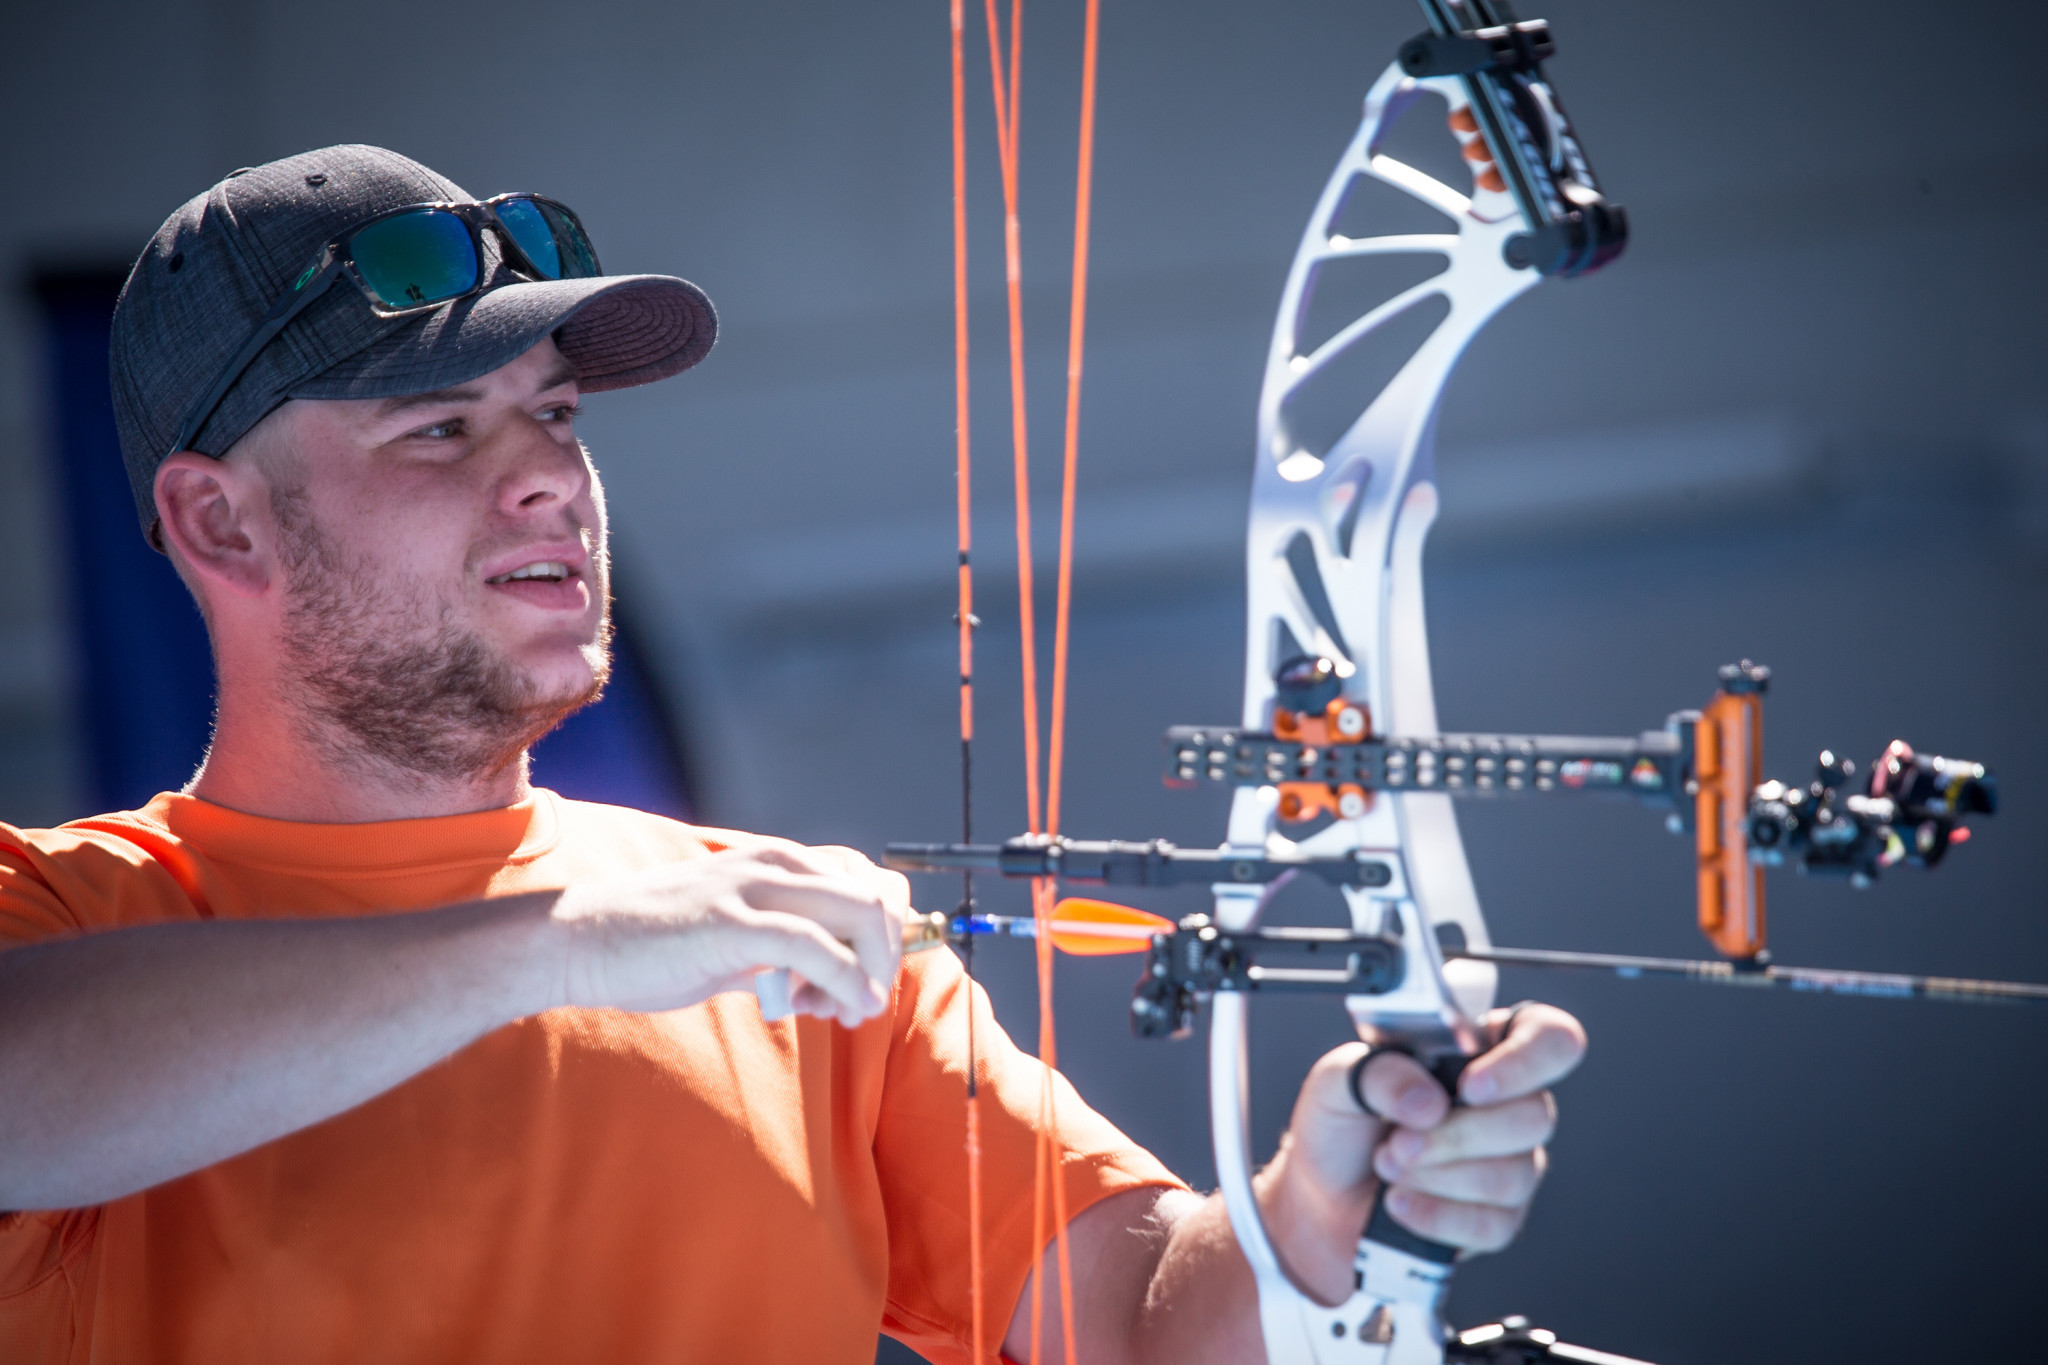 Rankings leader Schloesser tops men's compound qualification after day one of Indoor Archery World Series in Rome